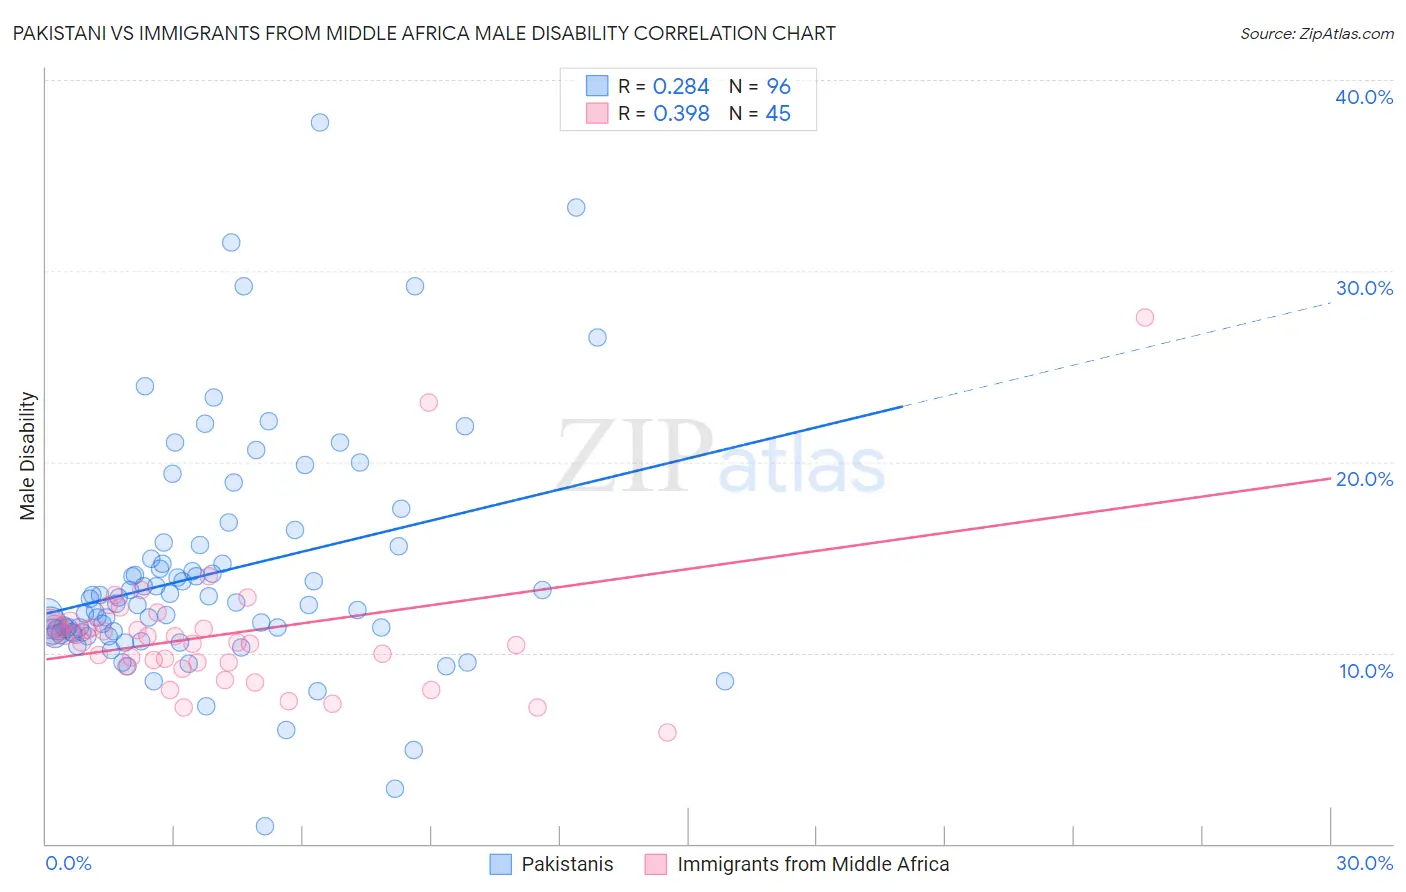 Pakistani vs Immigrants from Middle Africa Male Disability